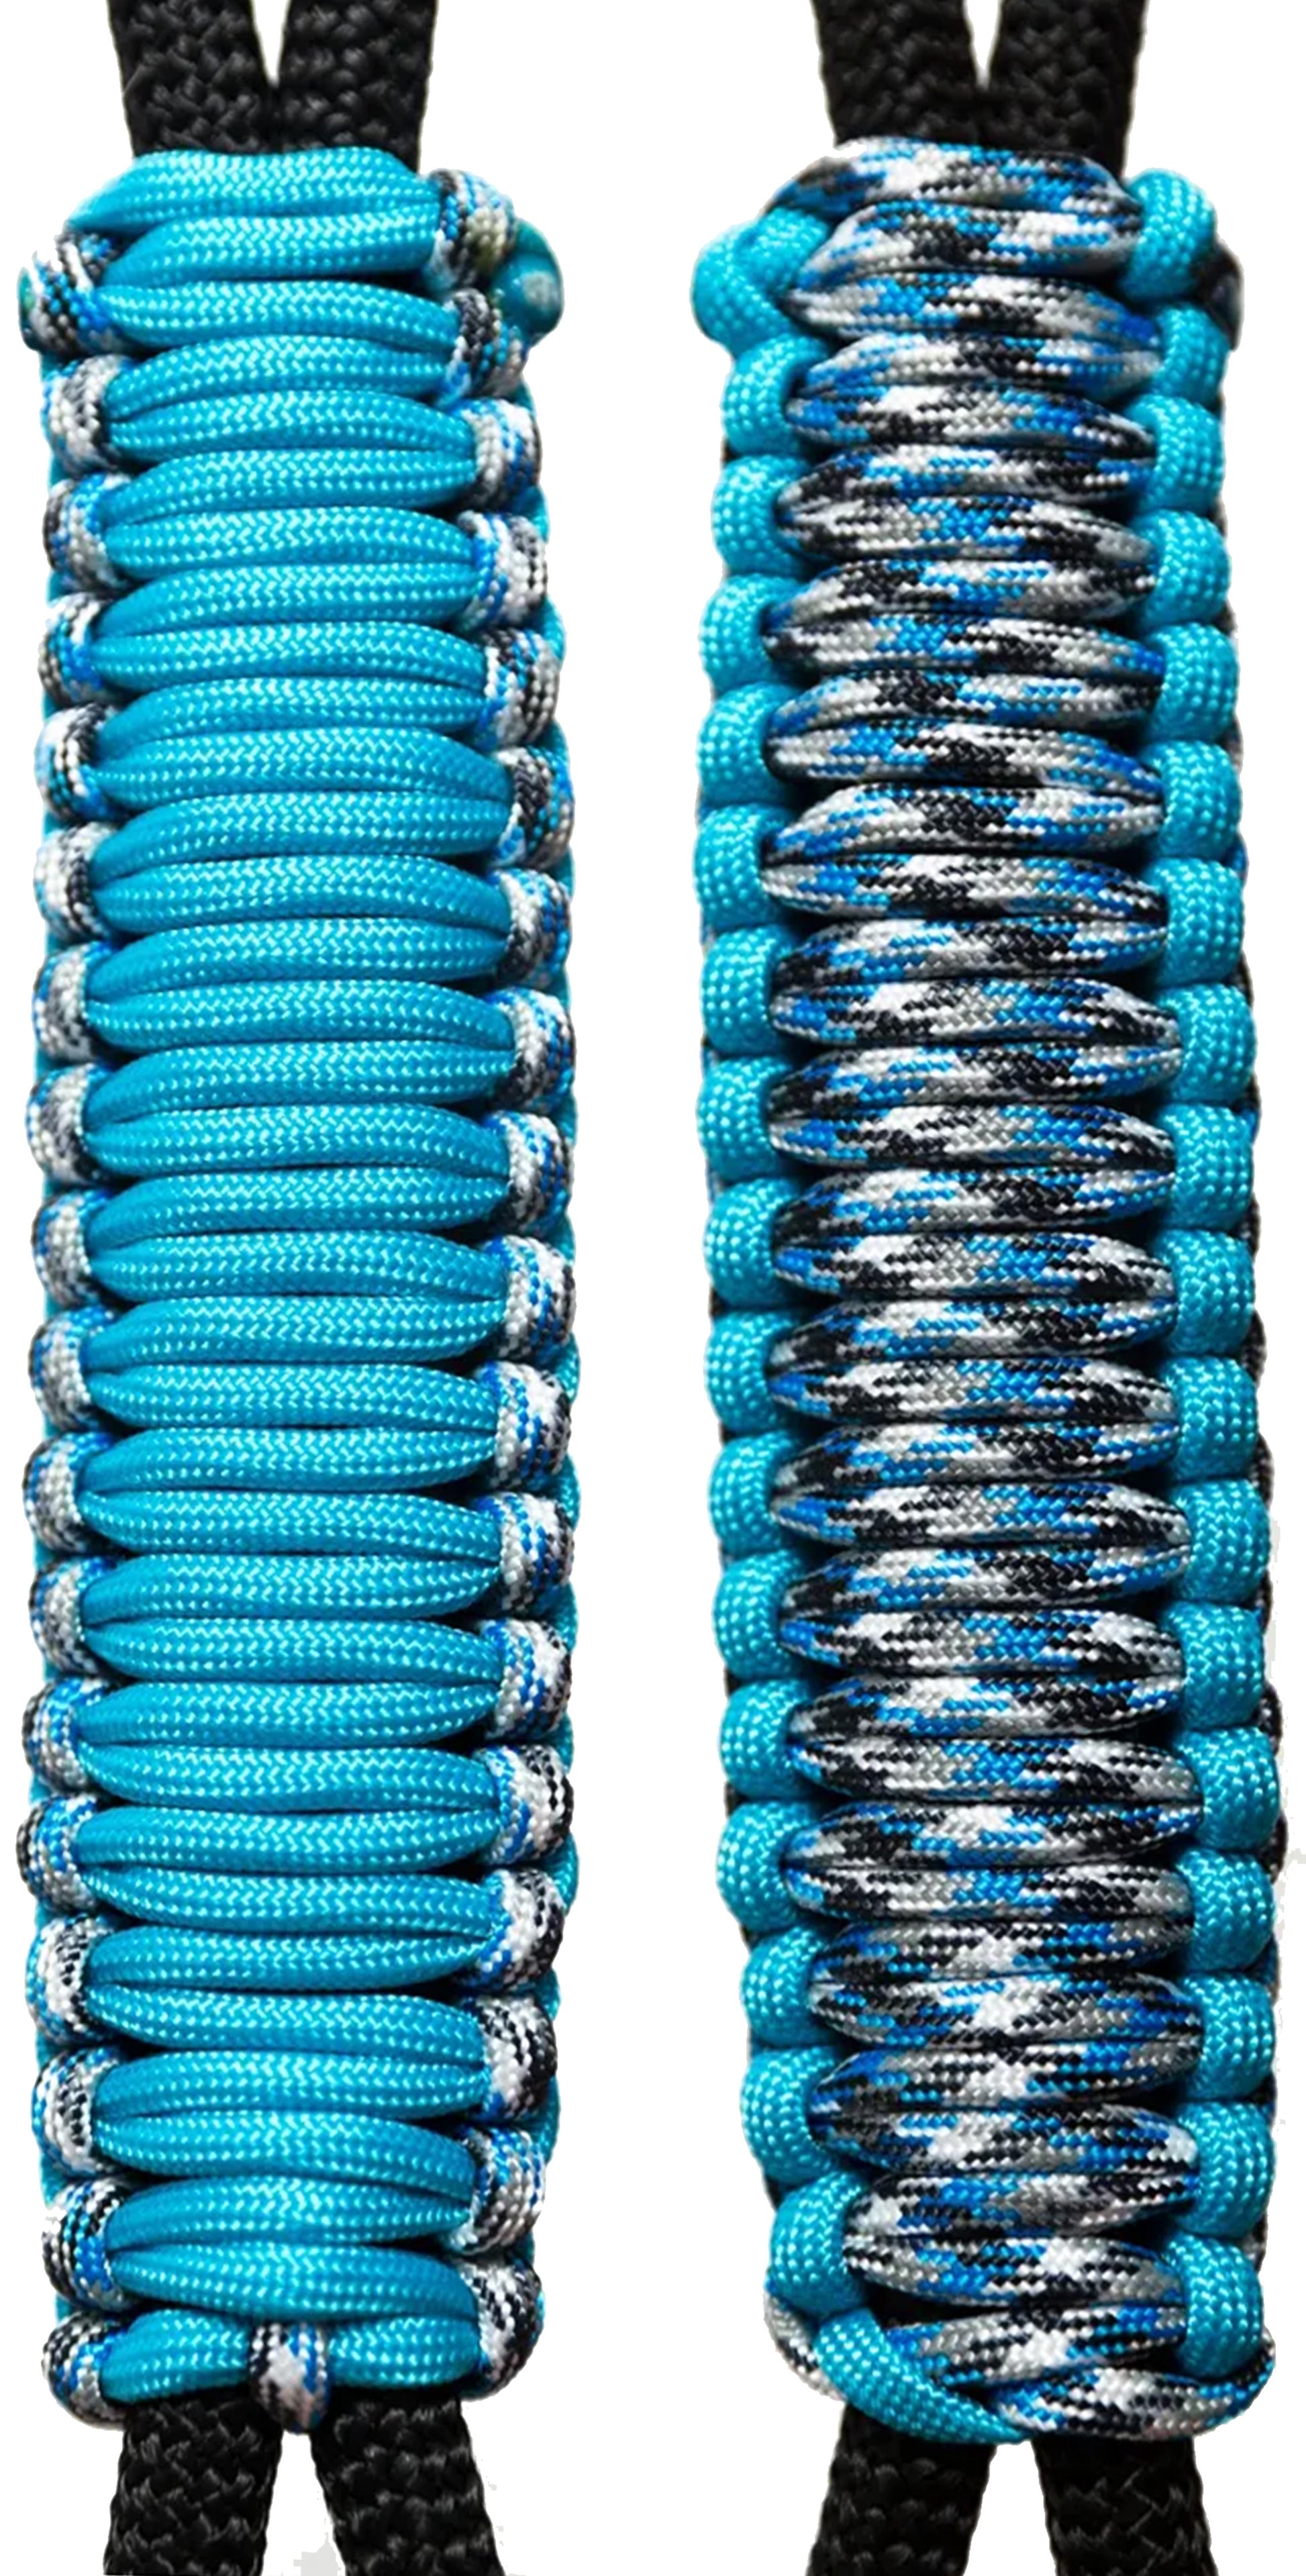 Blue Turquoise & Blue Camo -C016C038 - Paracord Handmade Handles for Stainless Steel Tumblers - Made in USA!